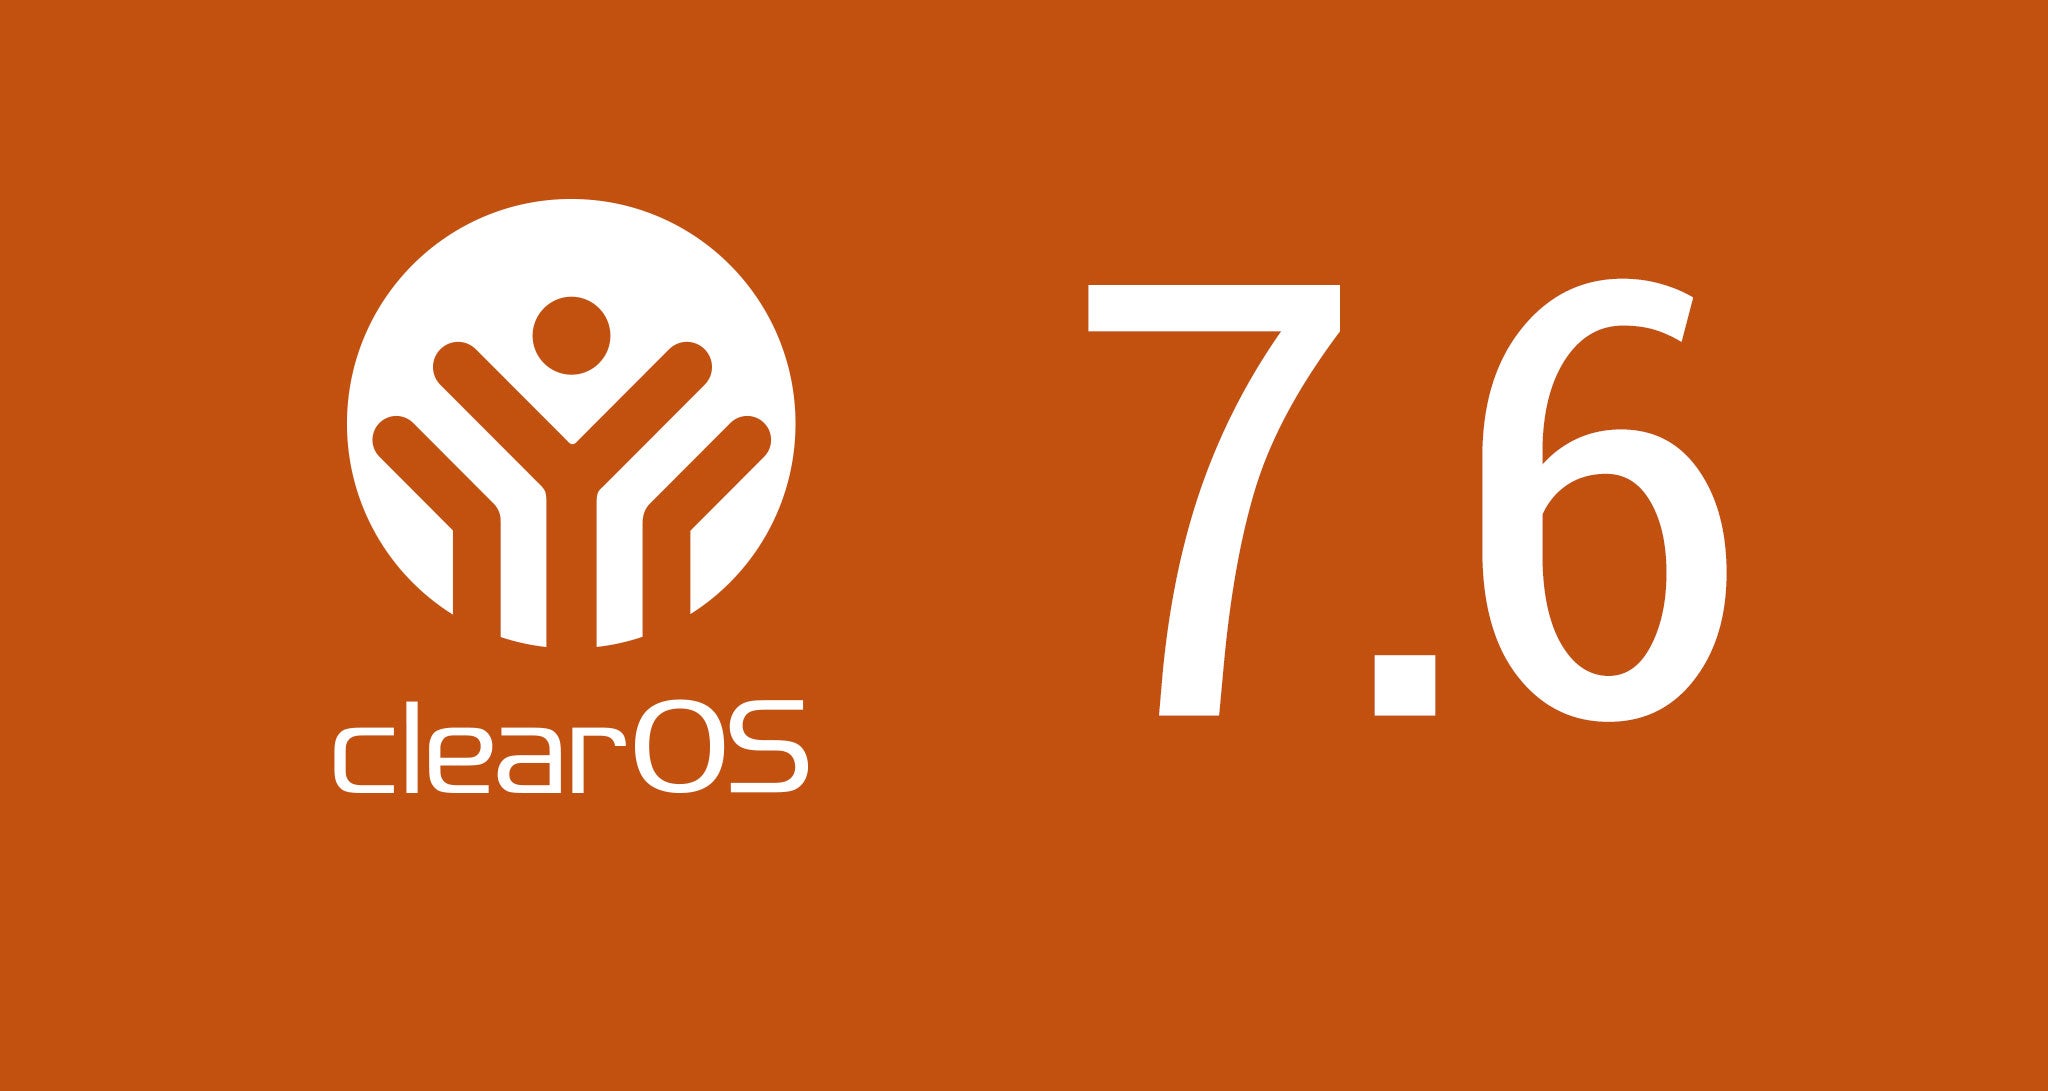 ClearOS Version 7.6 Released for All Editions